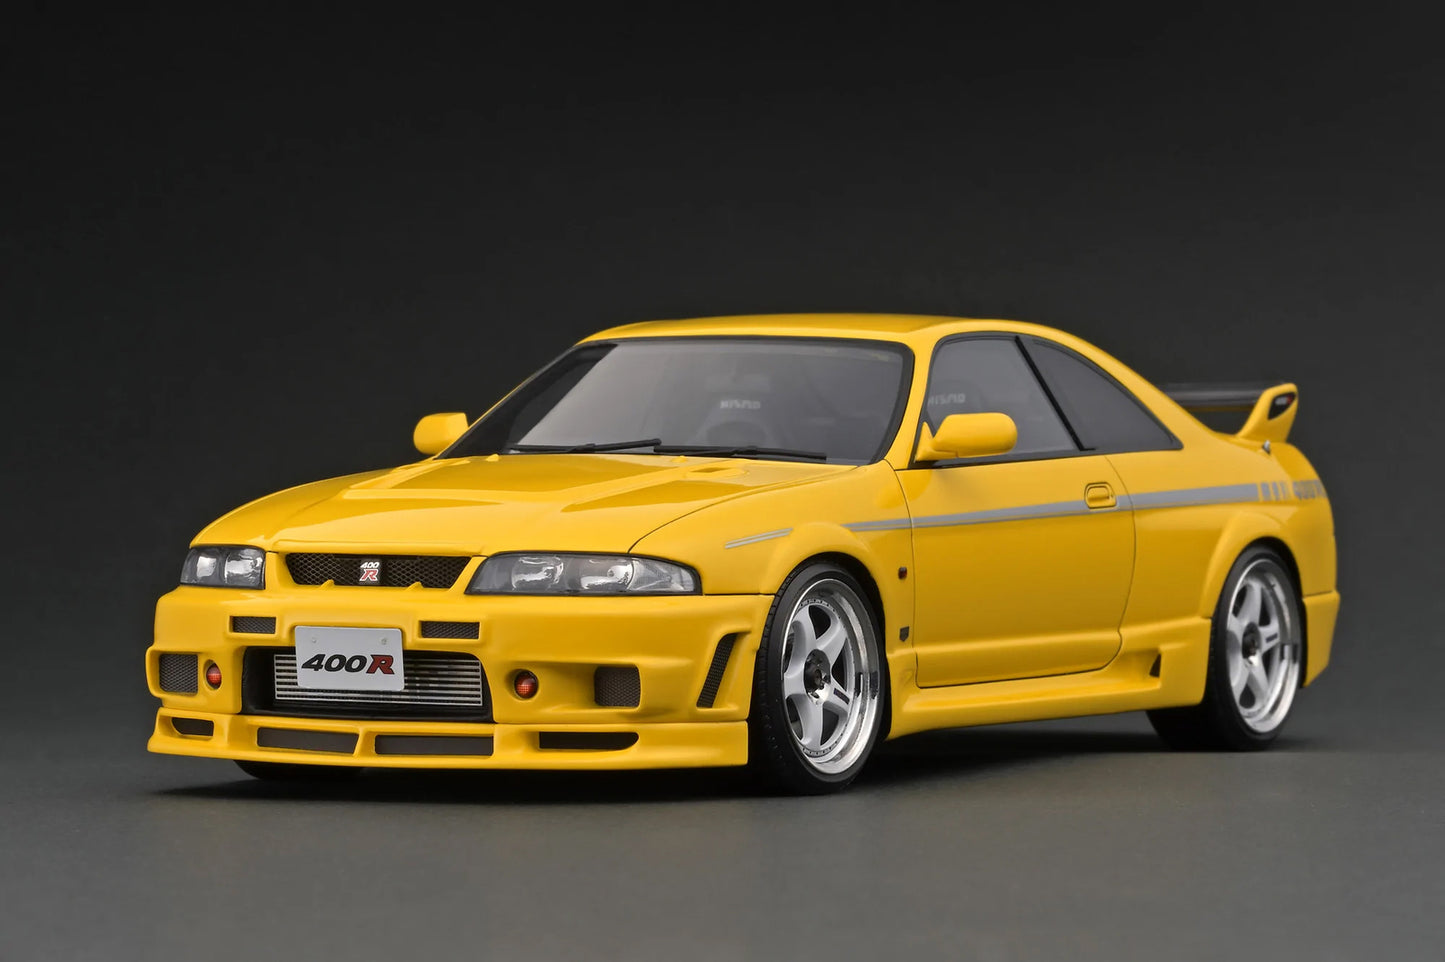 z Ignition Model Nismo R33 GT-R 400R Yellow IG2252